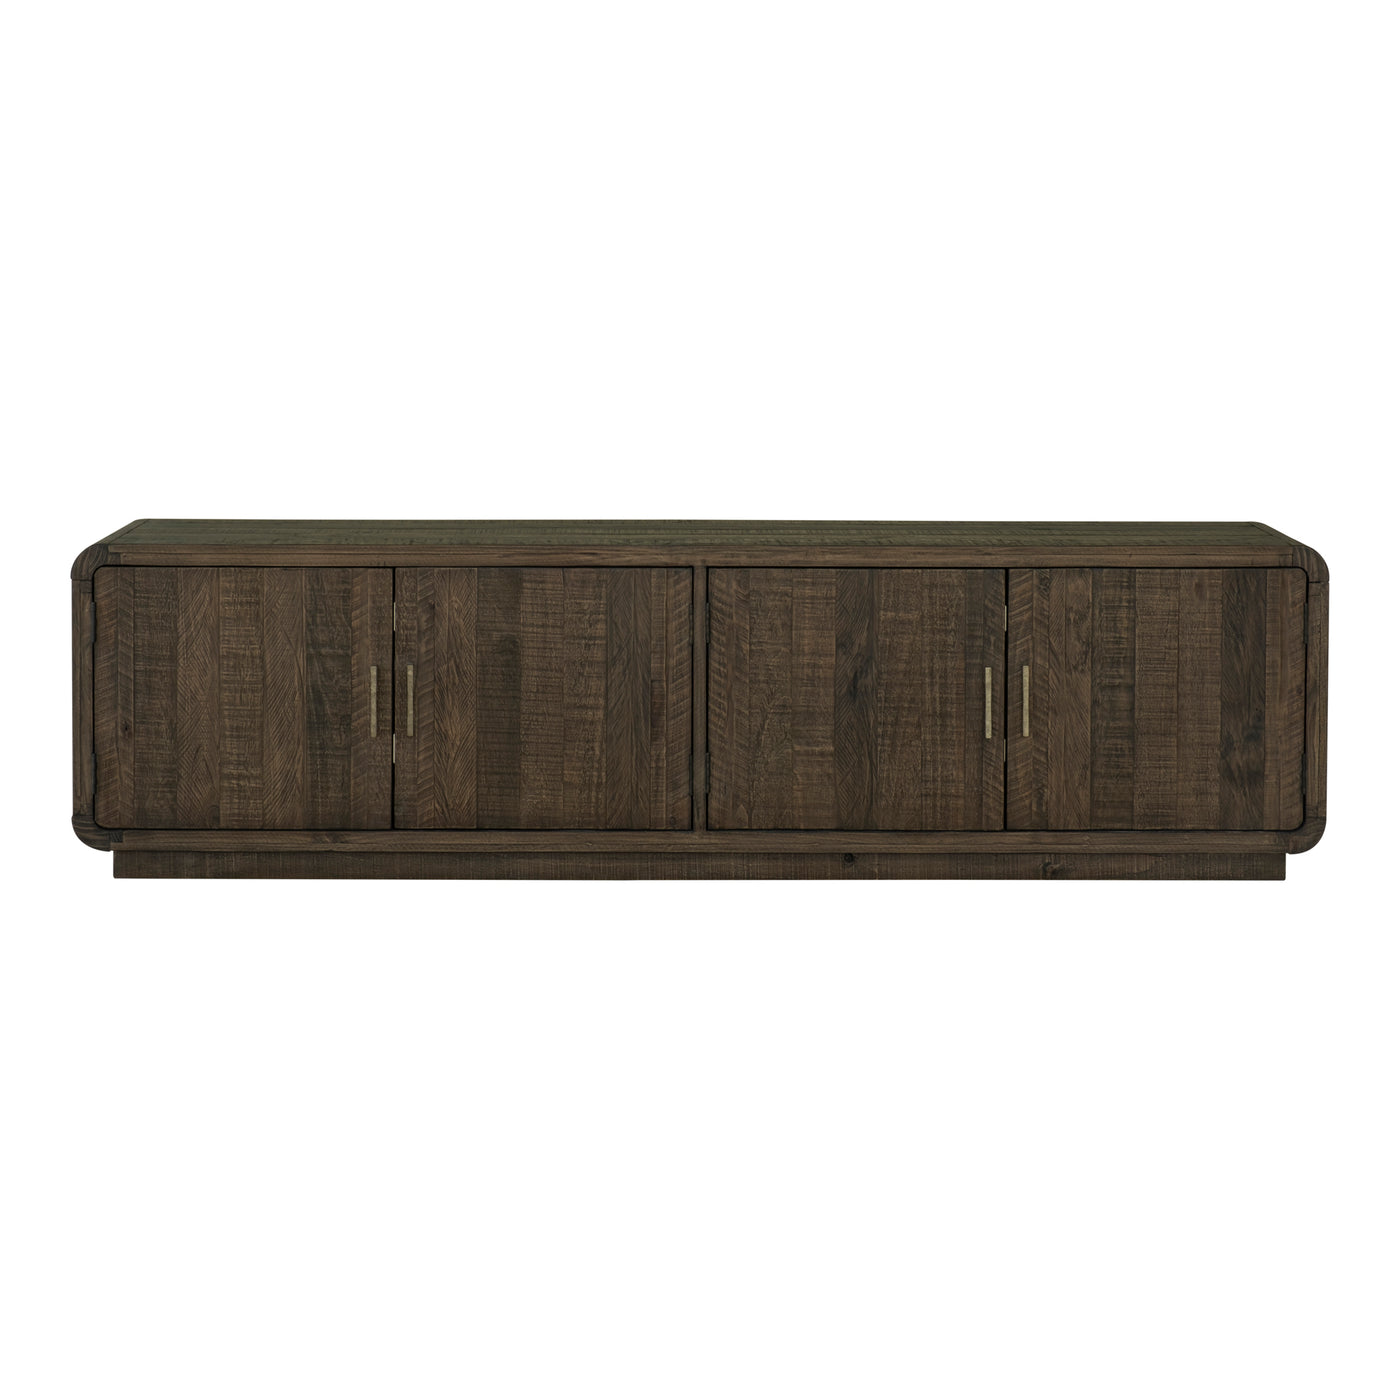 Earthy, on-trend rustic style has been rounded into a minimal silhouette with the Monterey media cabinet. This entertainme...